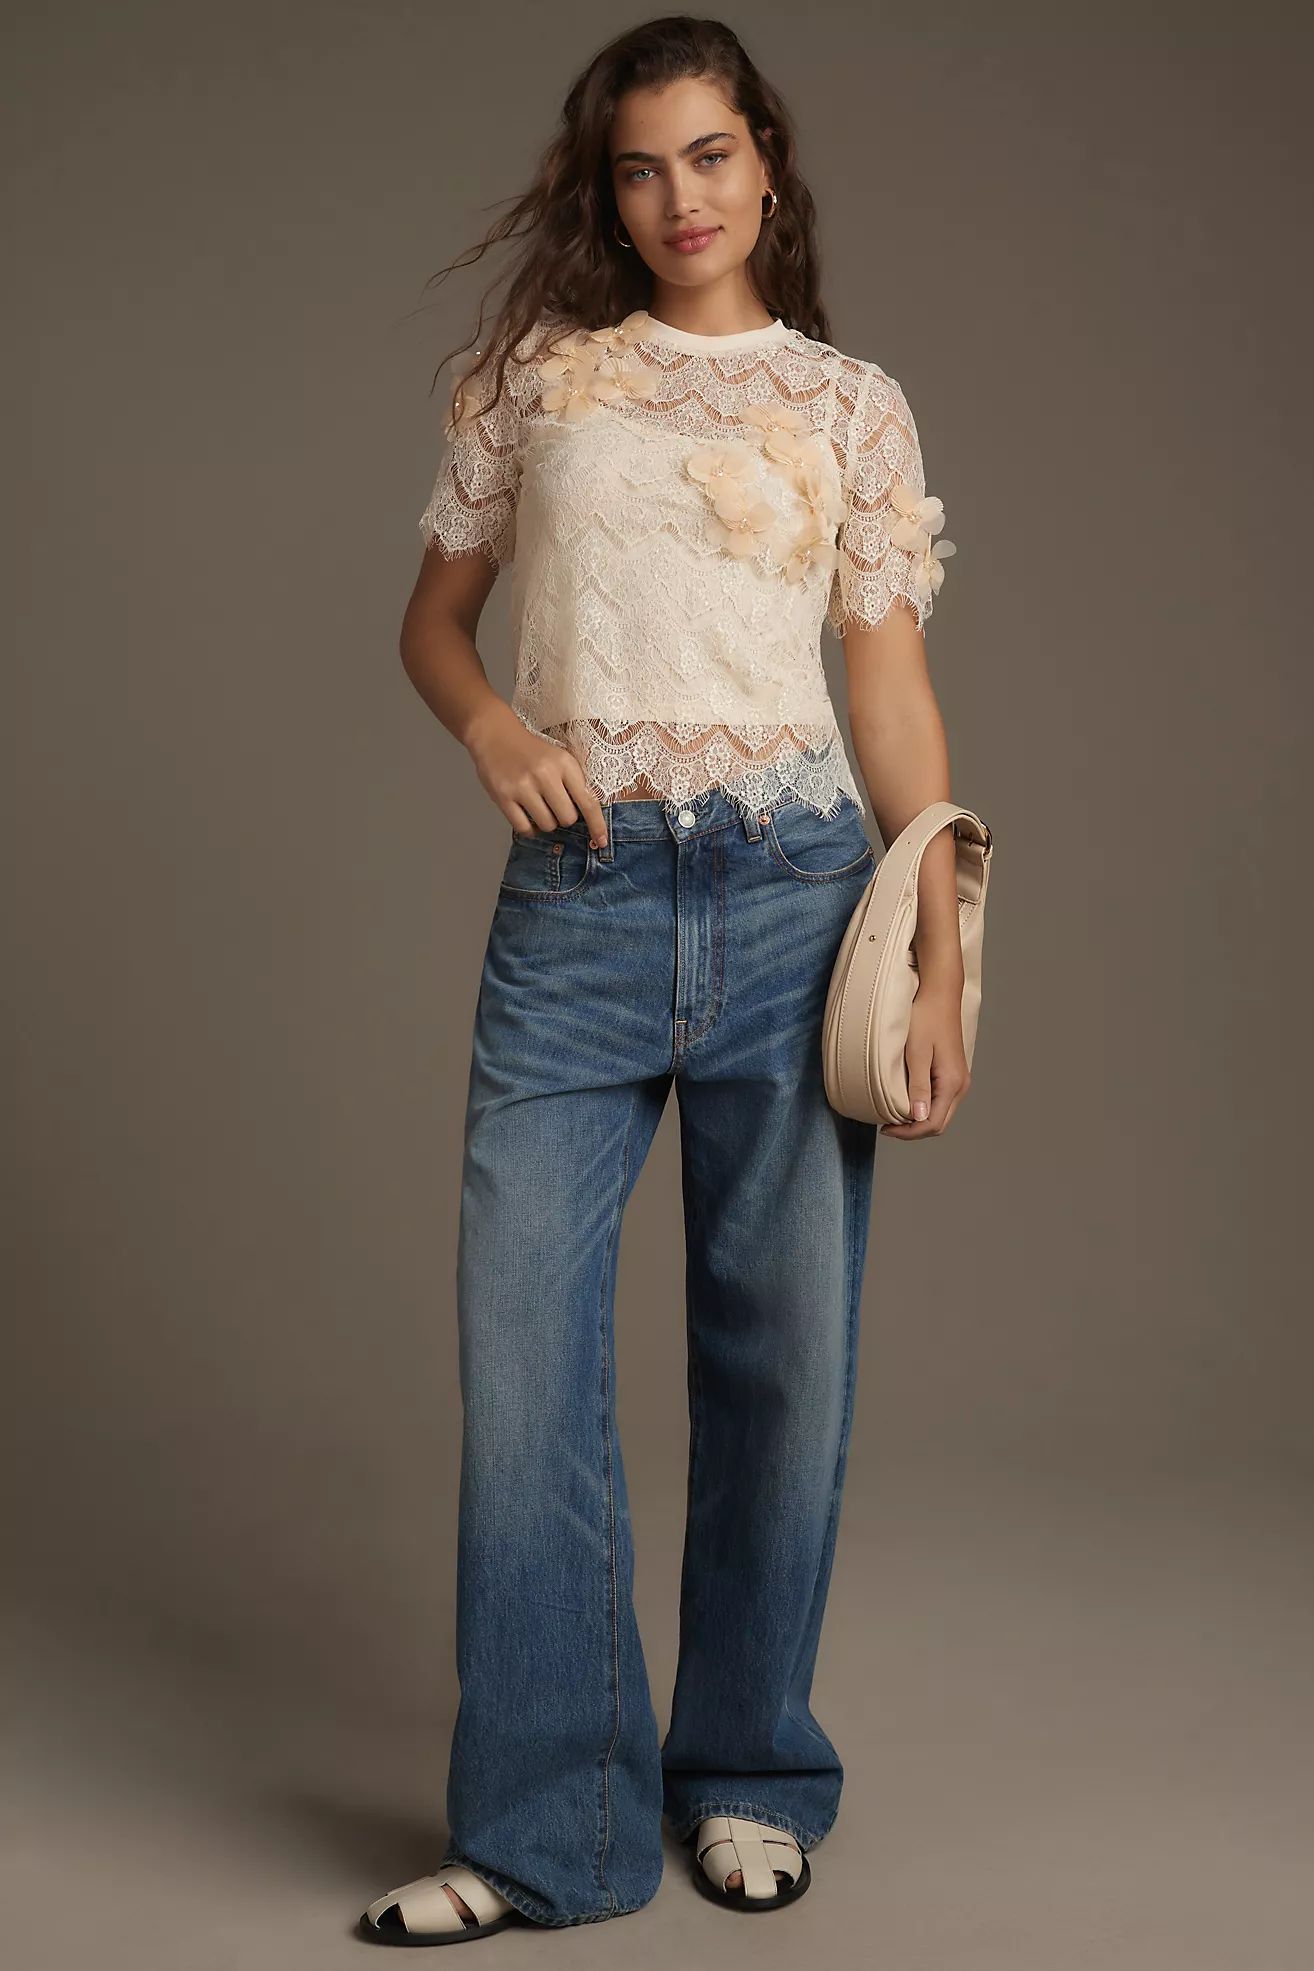 Sunday in Brooklyn Short-Sleeve Embellished Lace Top | Anthropologie (US)